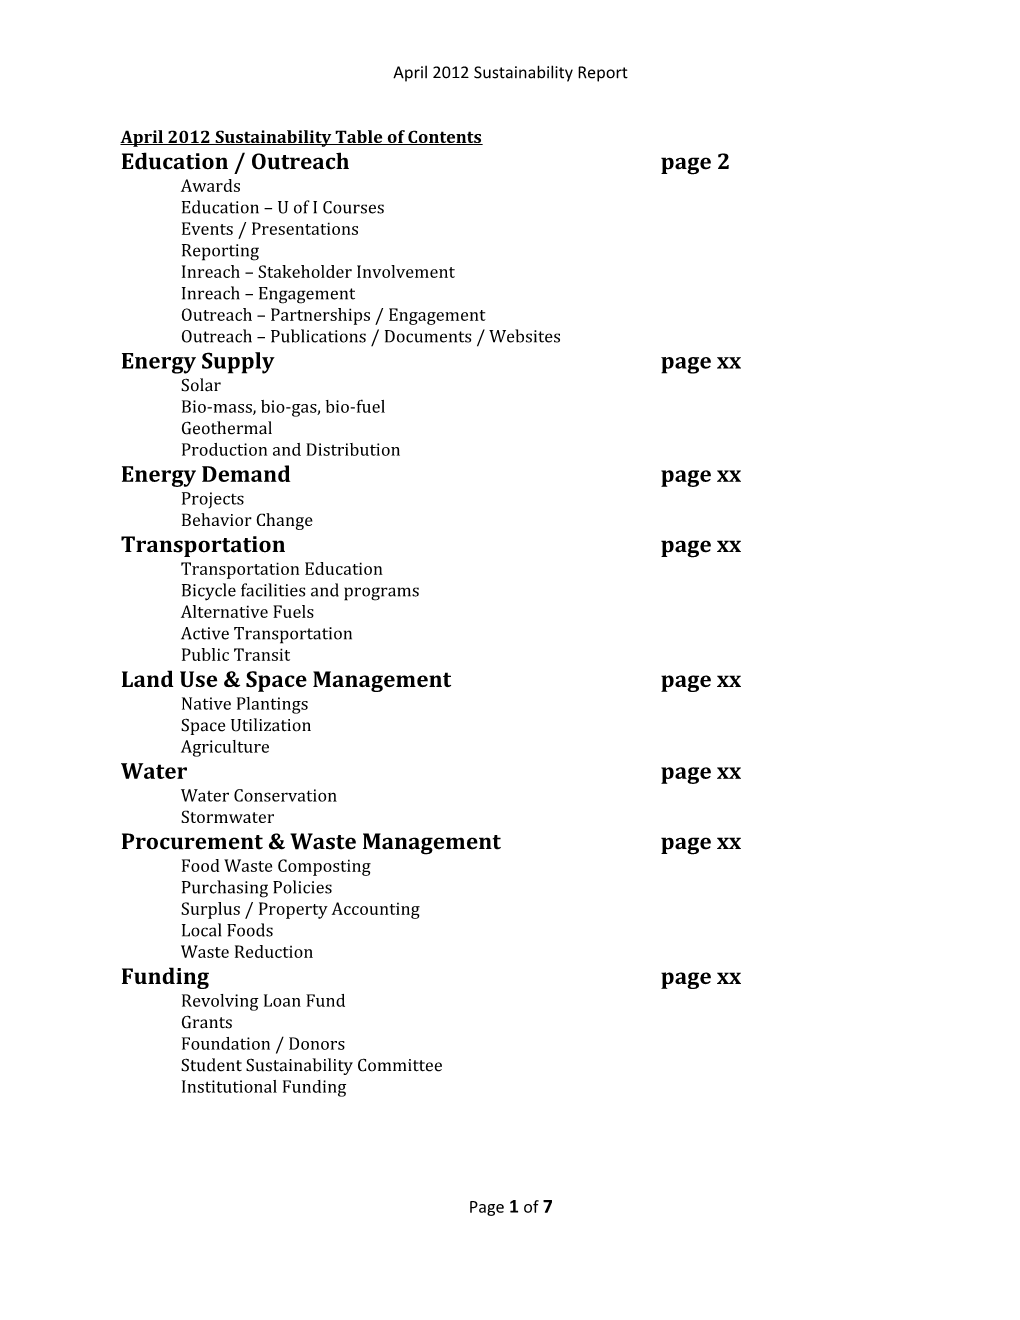 April 2012 Sustainability Table of Contents